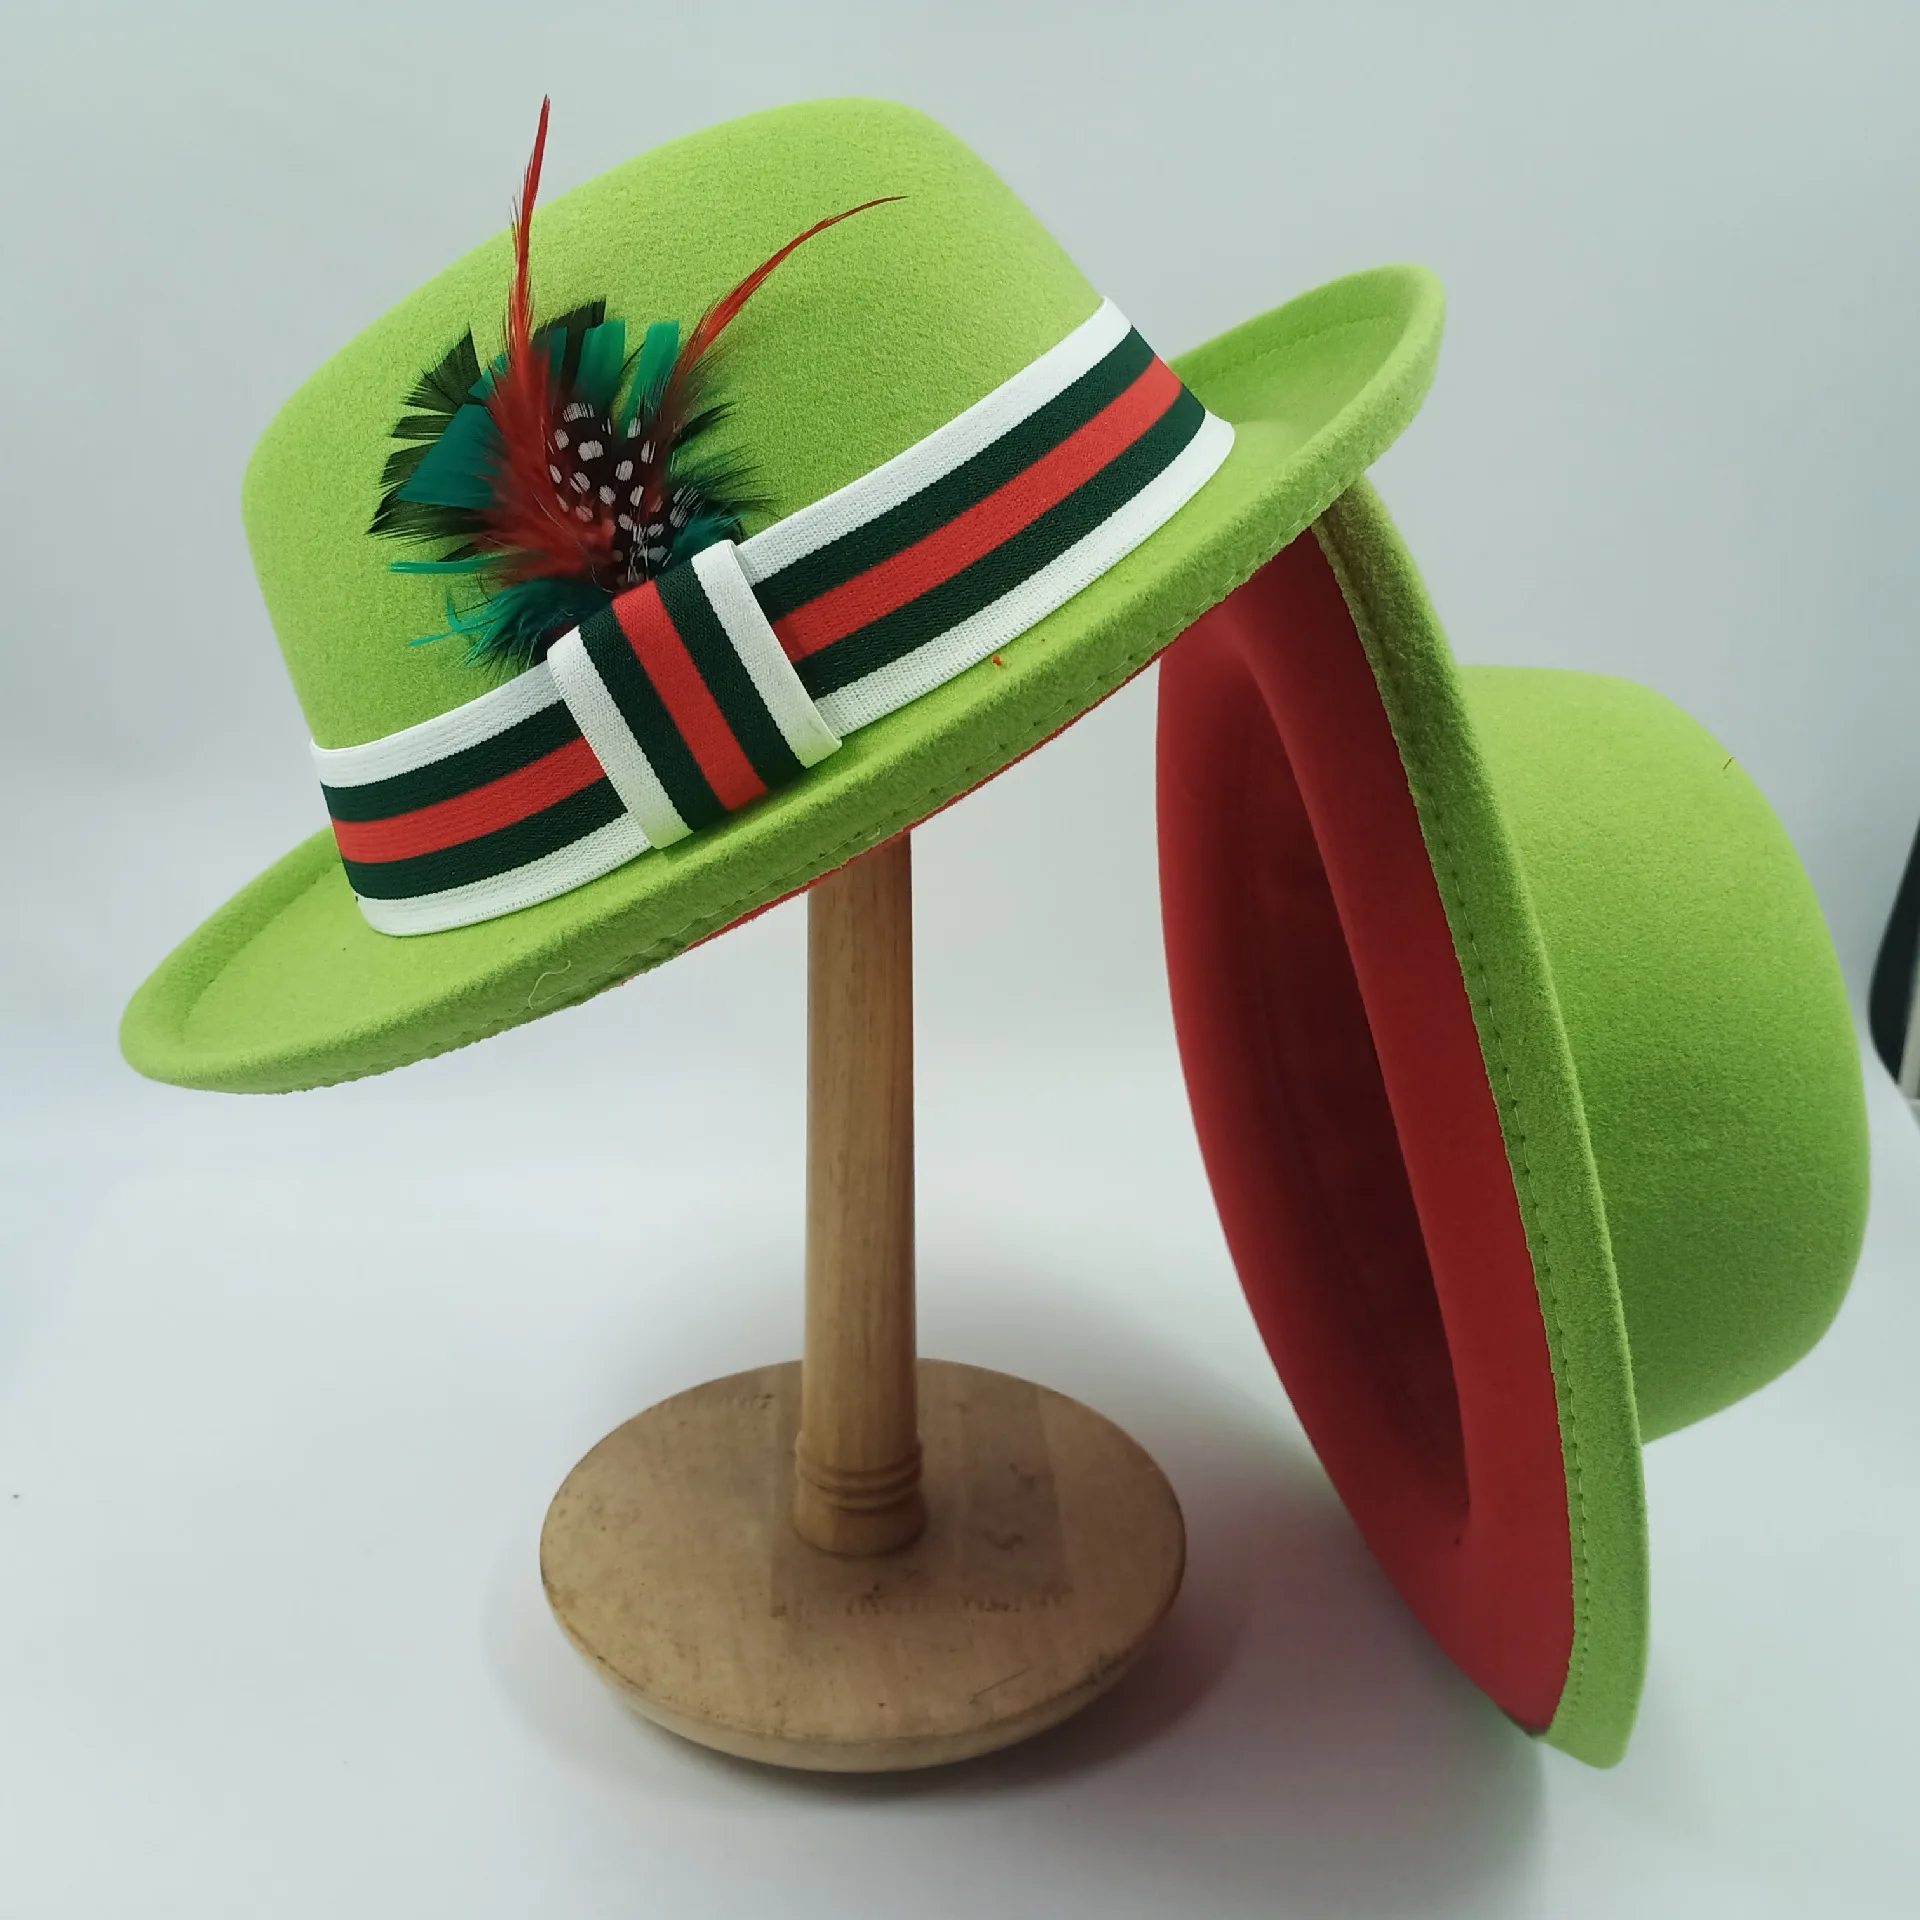 Hats & Scarves  Womens COS STRAW SUN HAT Green ~ Theatre Collective